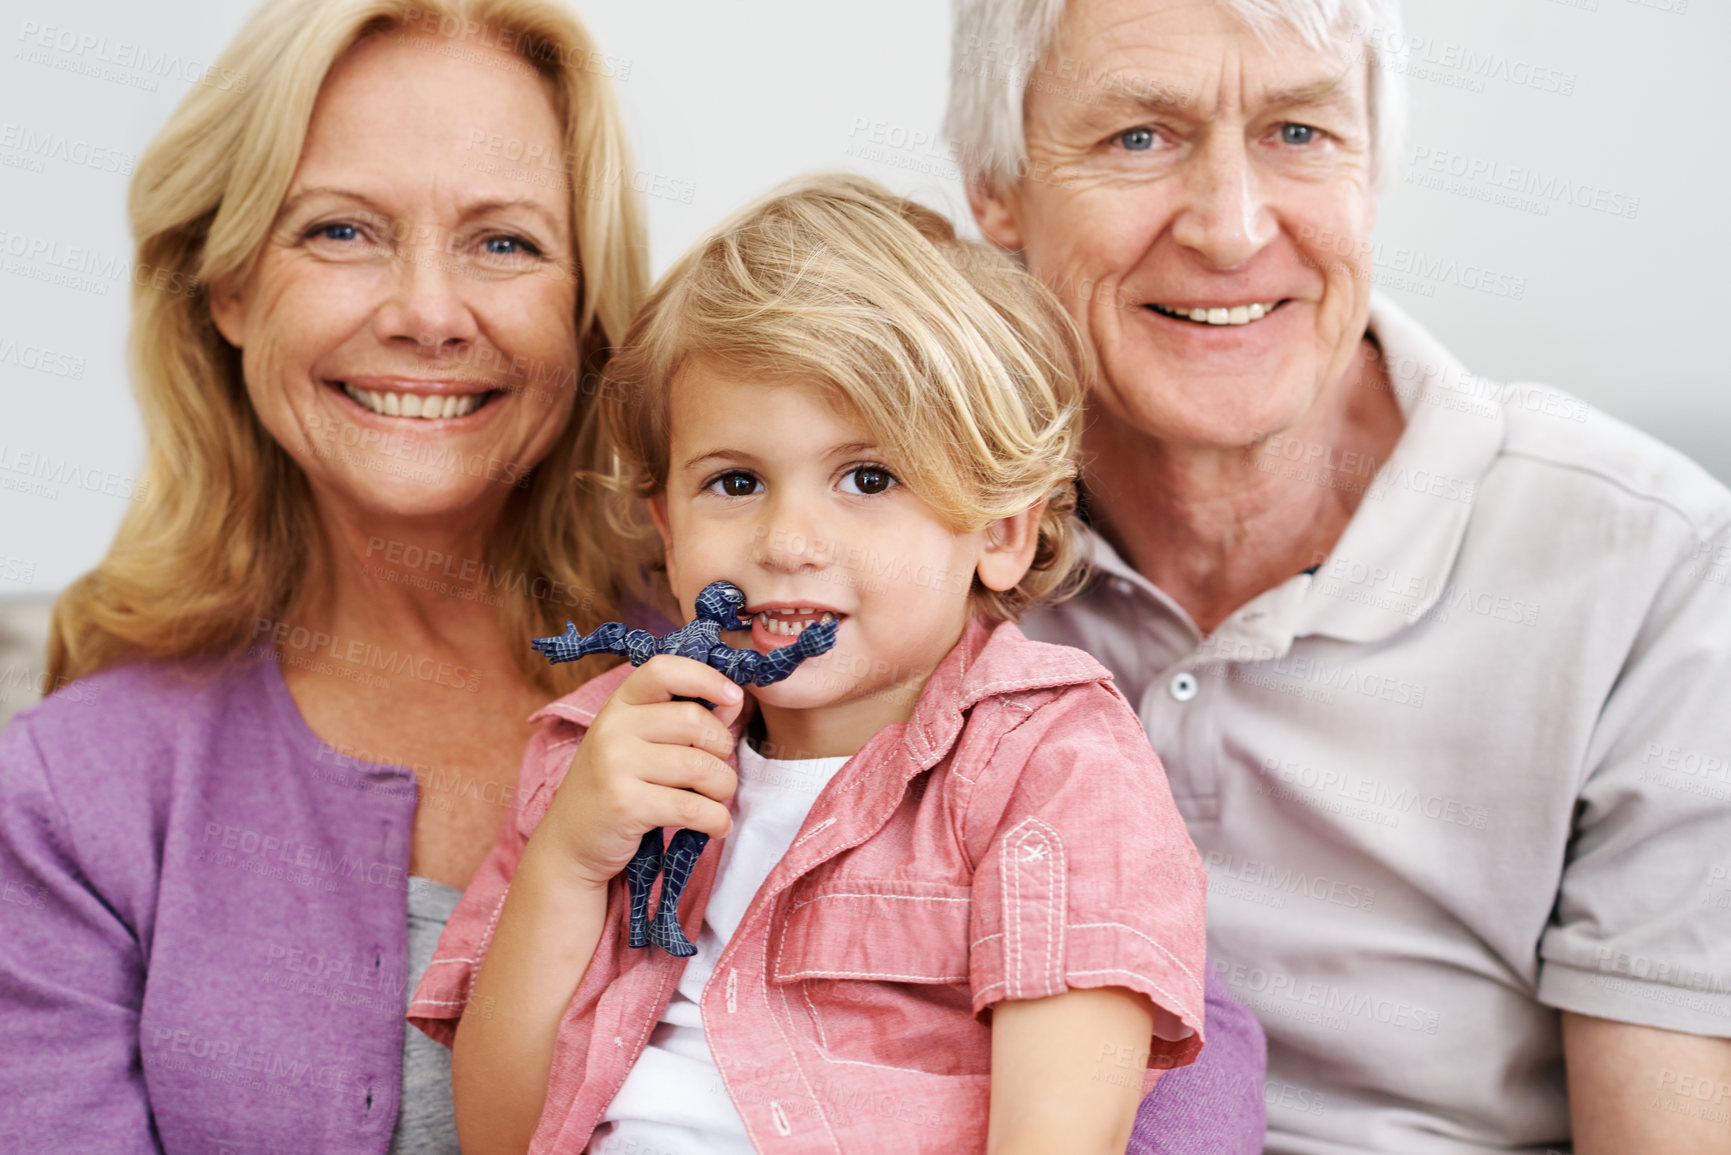 Buy stock photo Shot of a senior couple sitting with their adorable grandson